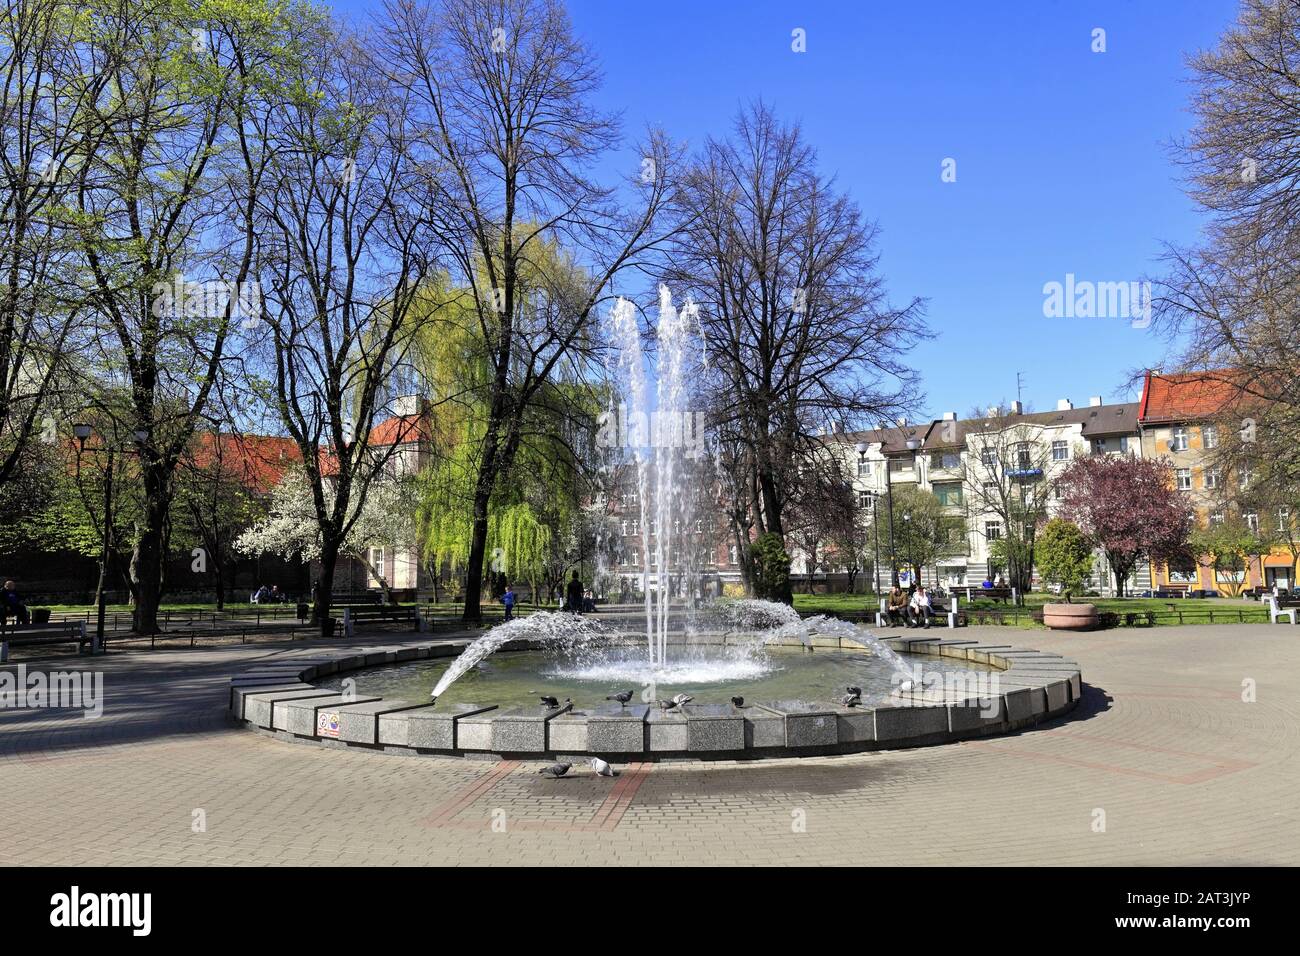 Katowice, Silesia / Poland - 2019/04/18: Panoramic view of the city park and fountain of the Plac Andrzeja square - Andrew square - in Katowice Stock Photo